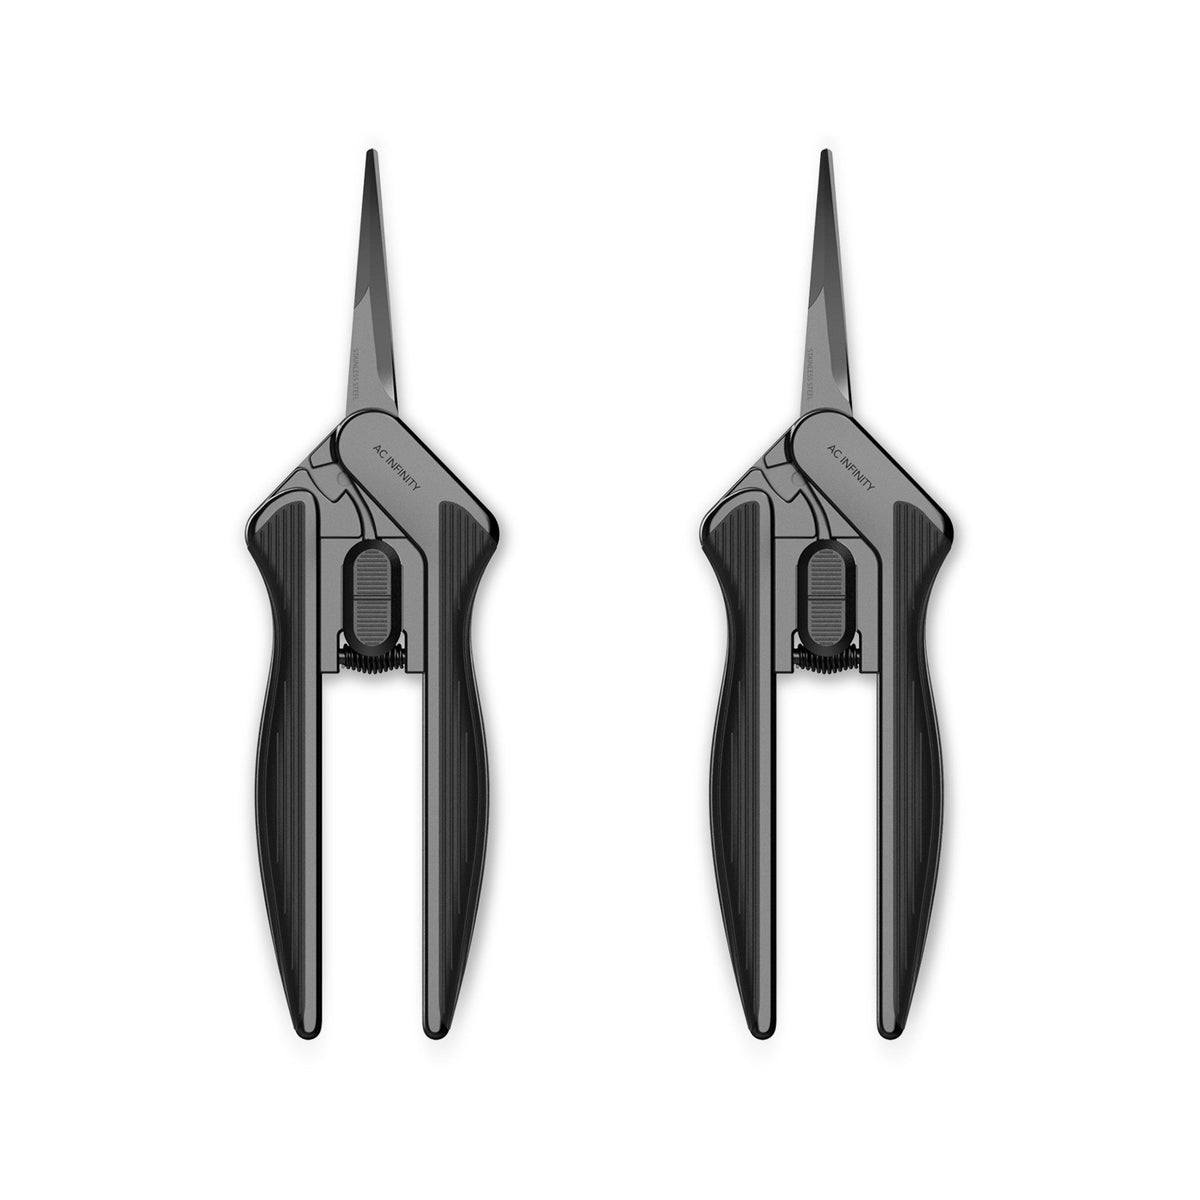 AC Infinity AC Infinity Stainless Steel Pruning Shear Trimming Scissors - 2-pack Main